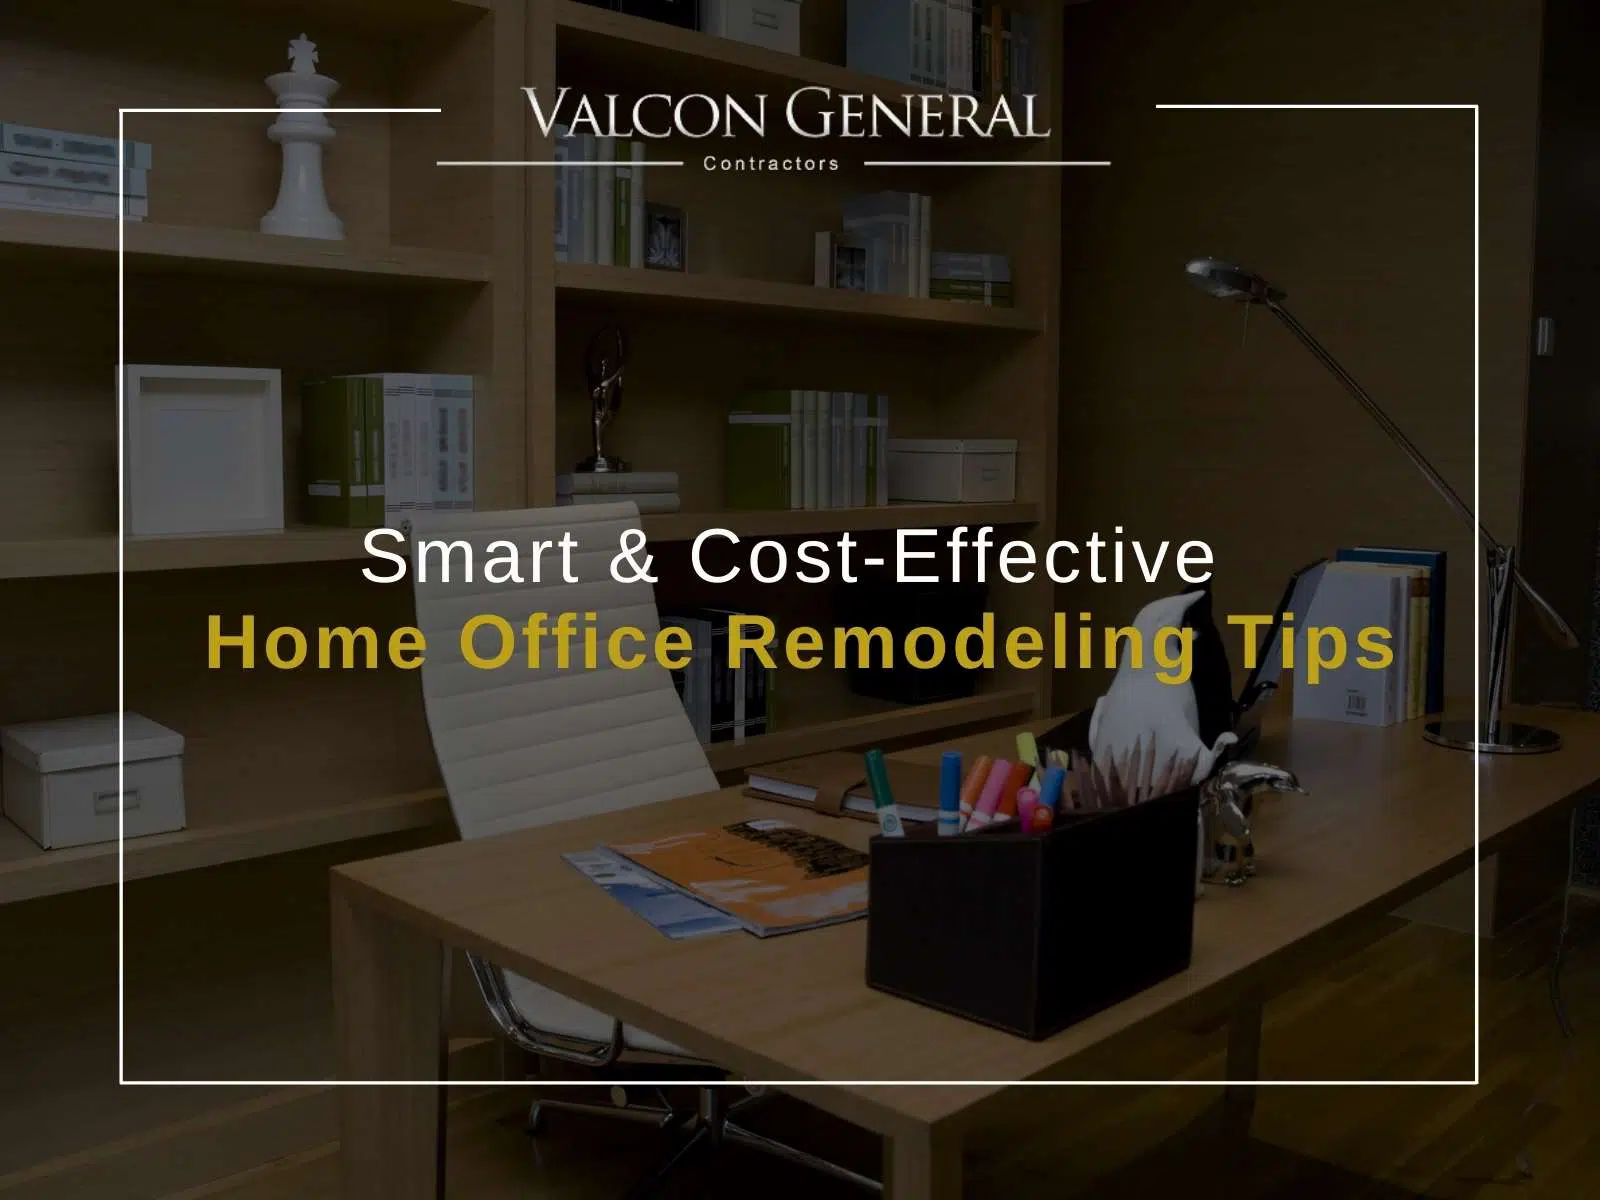 Smart & Cost-Effective Home Office Remodeling Tips